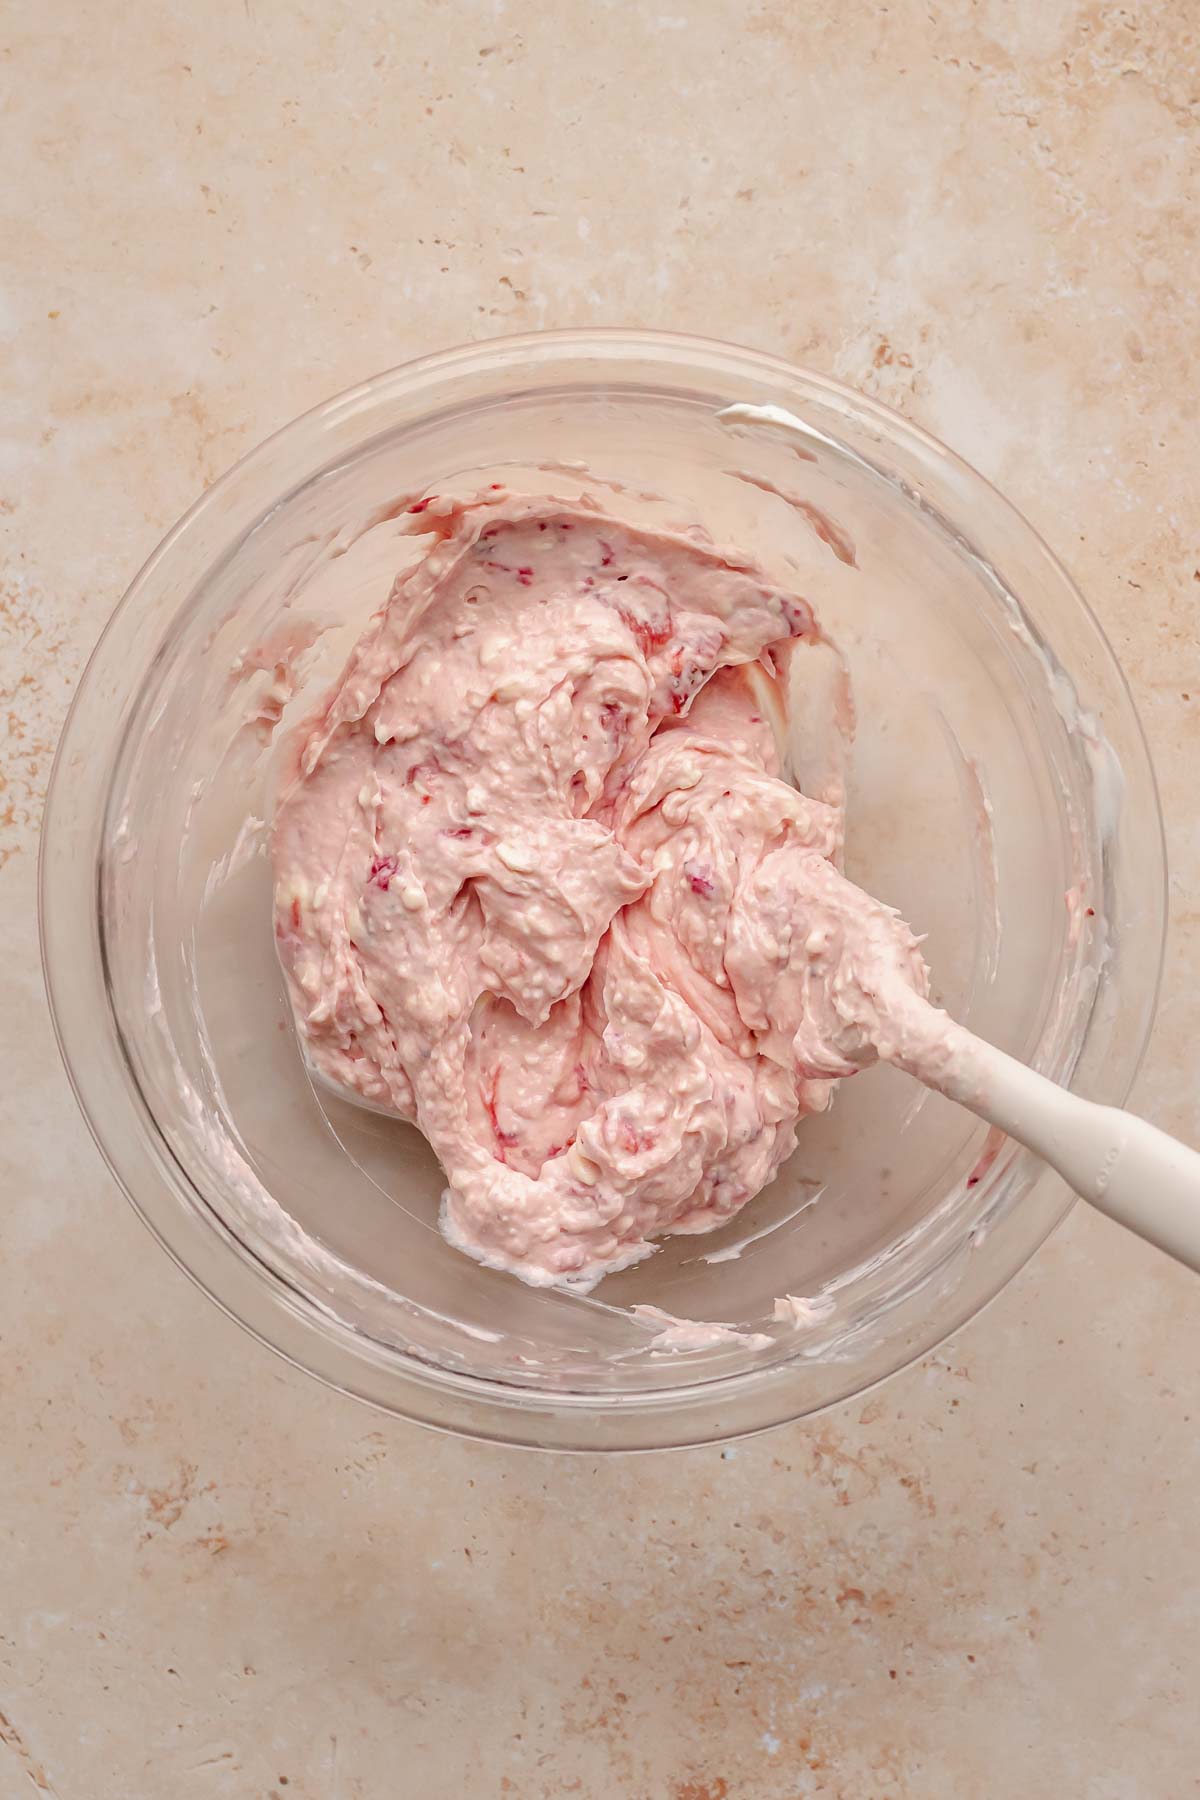 Strawberry syrup and cream cheese mixed together in a bowl with a spatula.